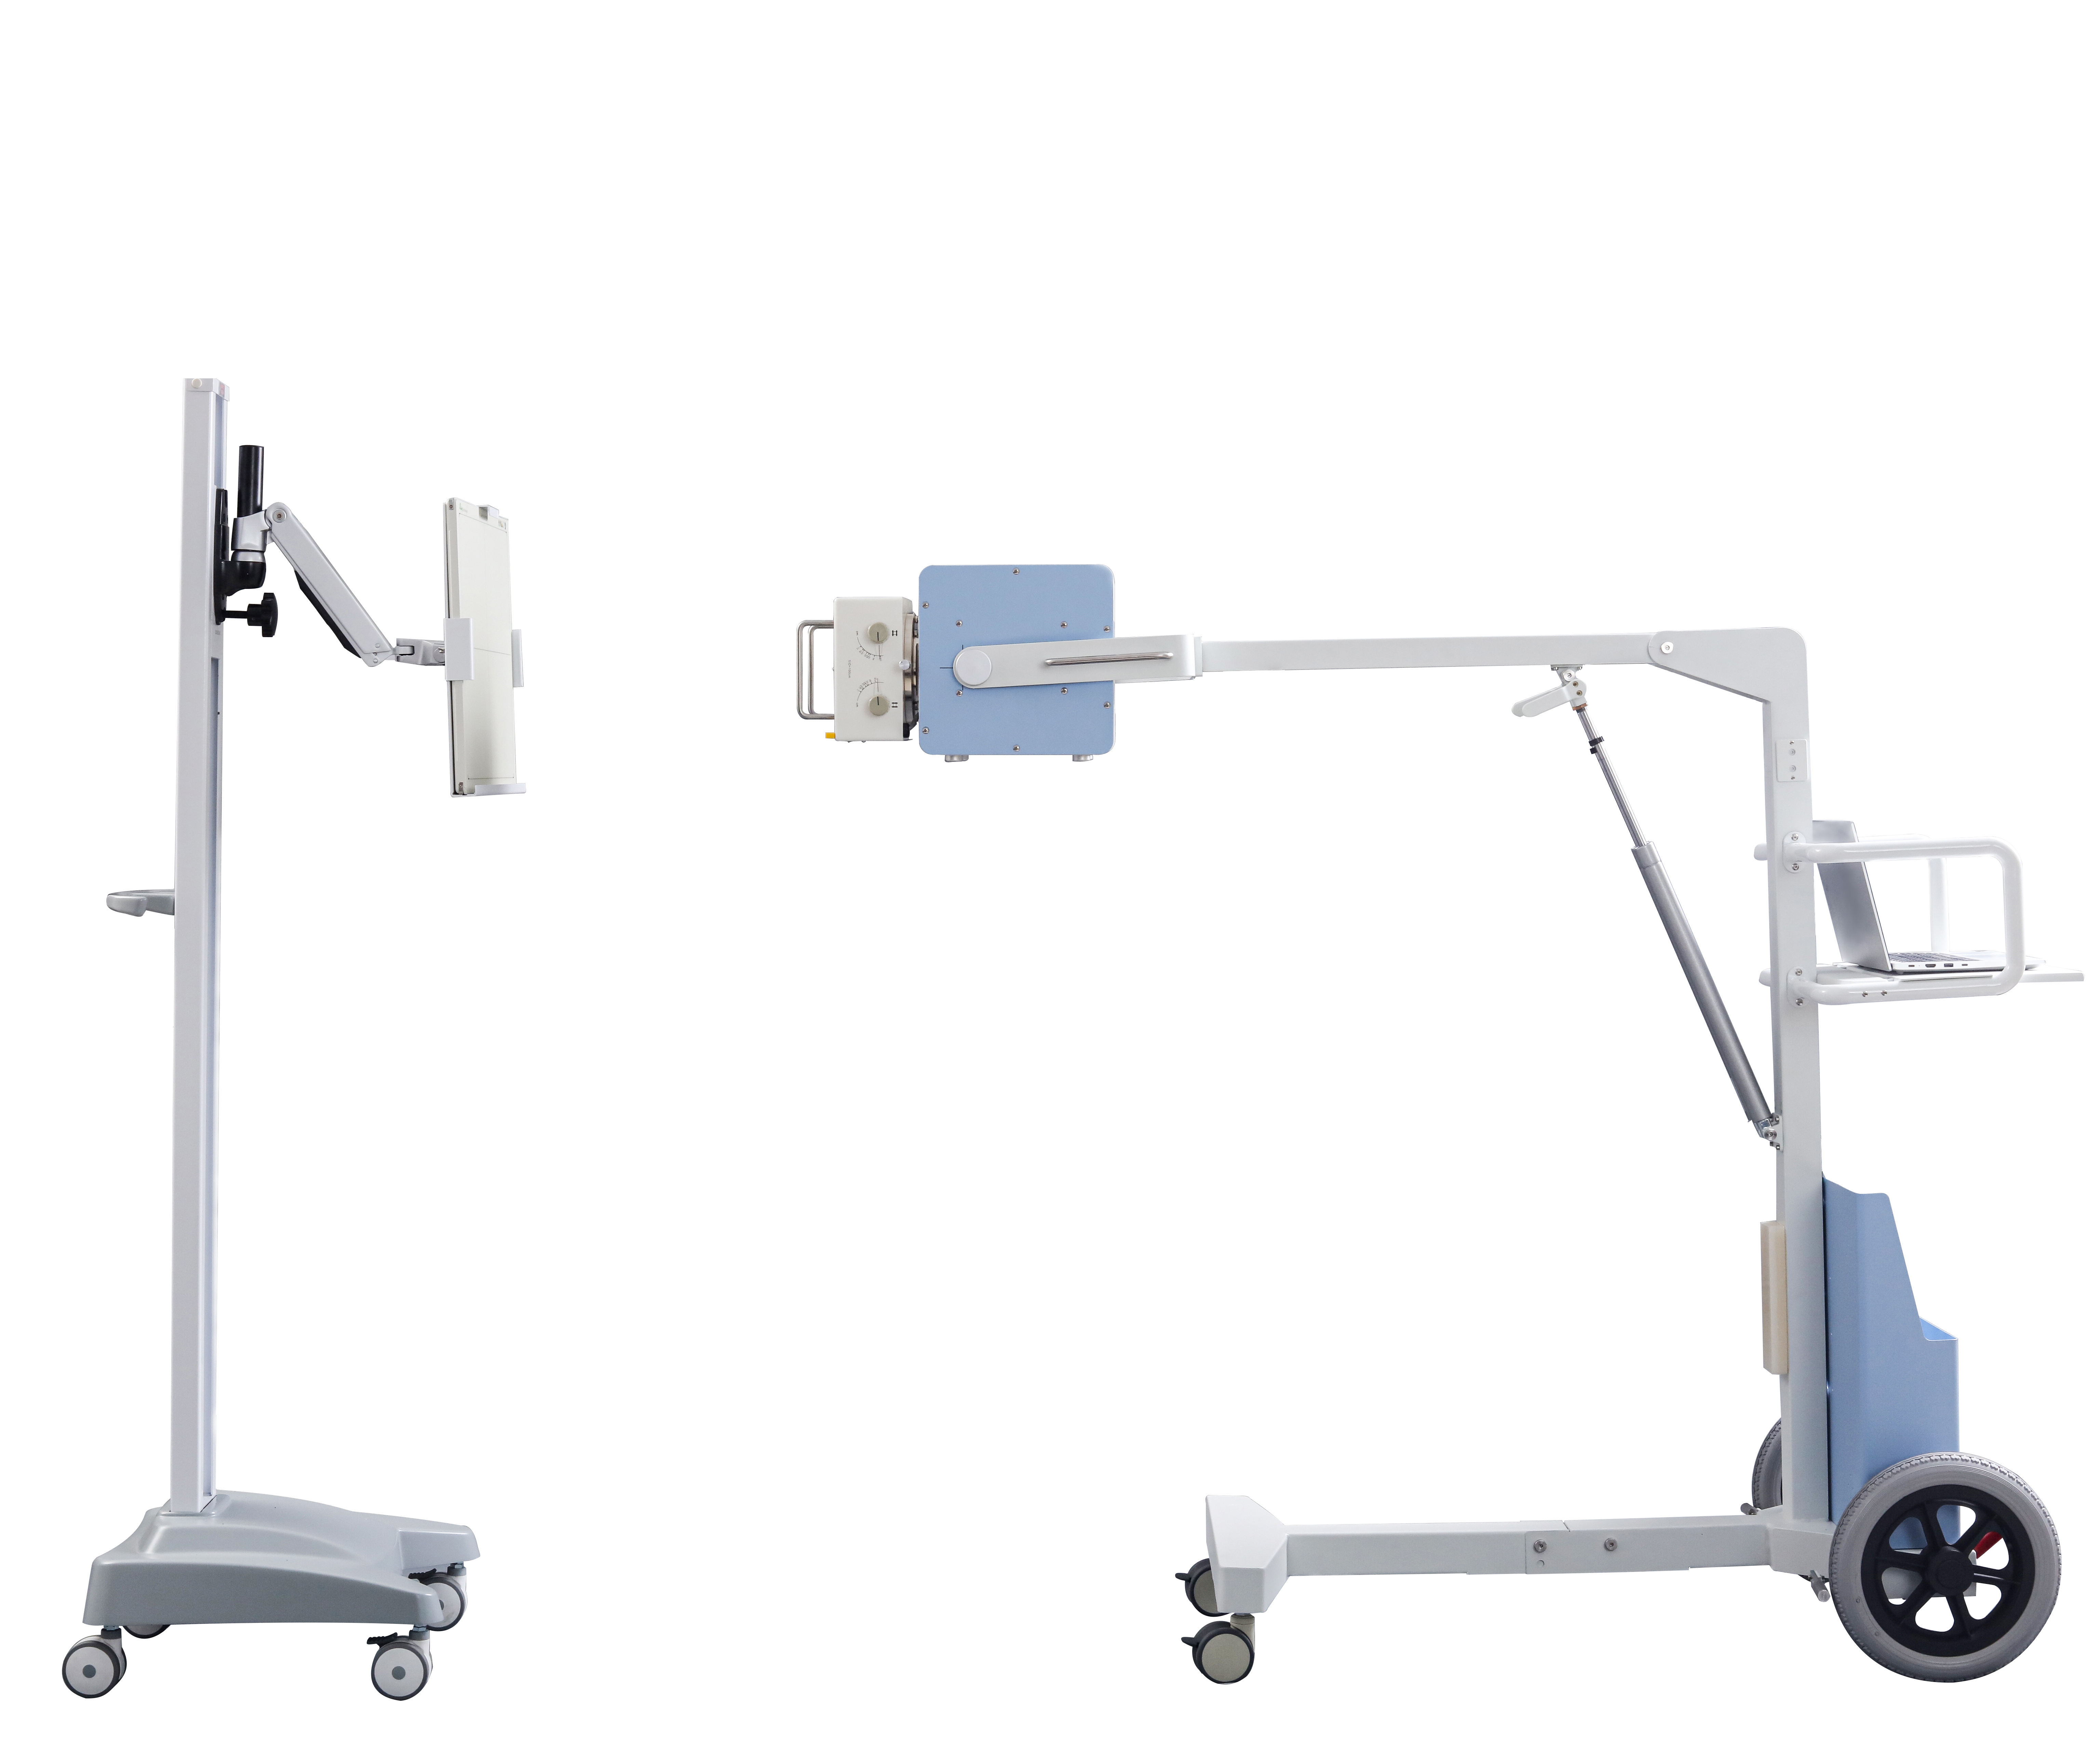 MS-M1500 5.0KW High Frequency Portable X-ray Machine